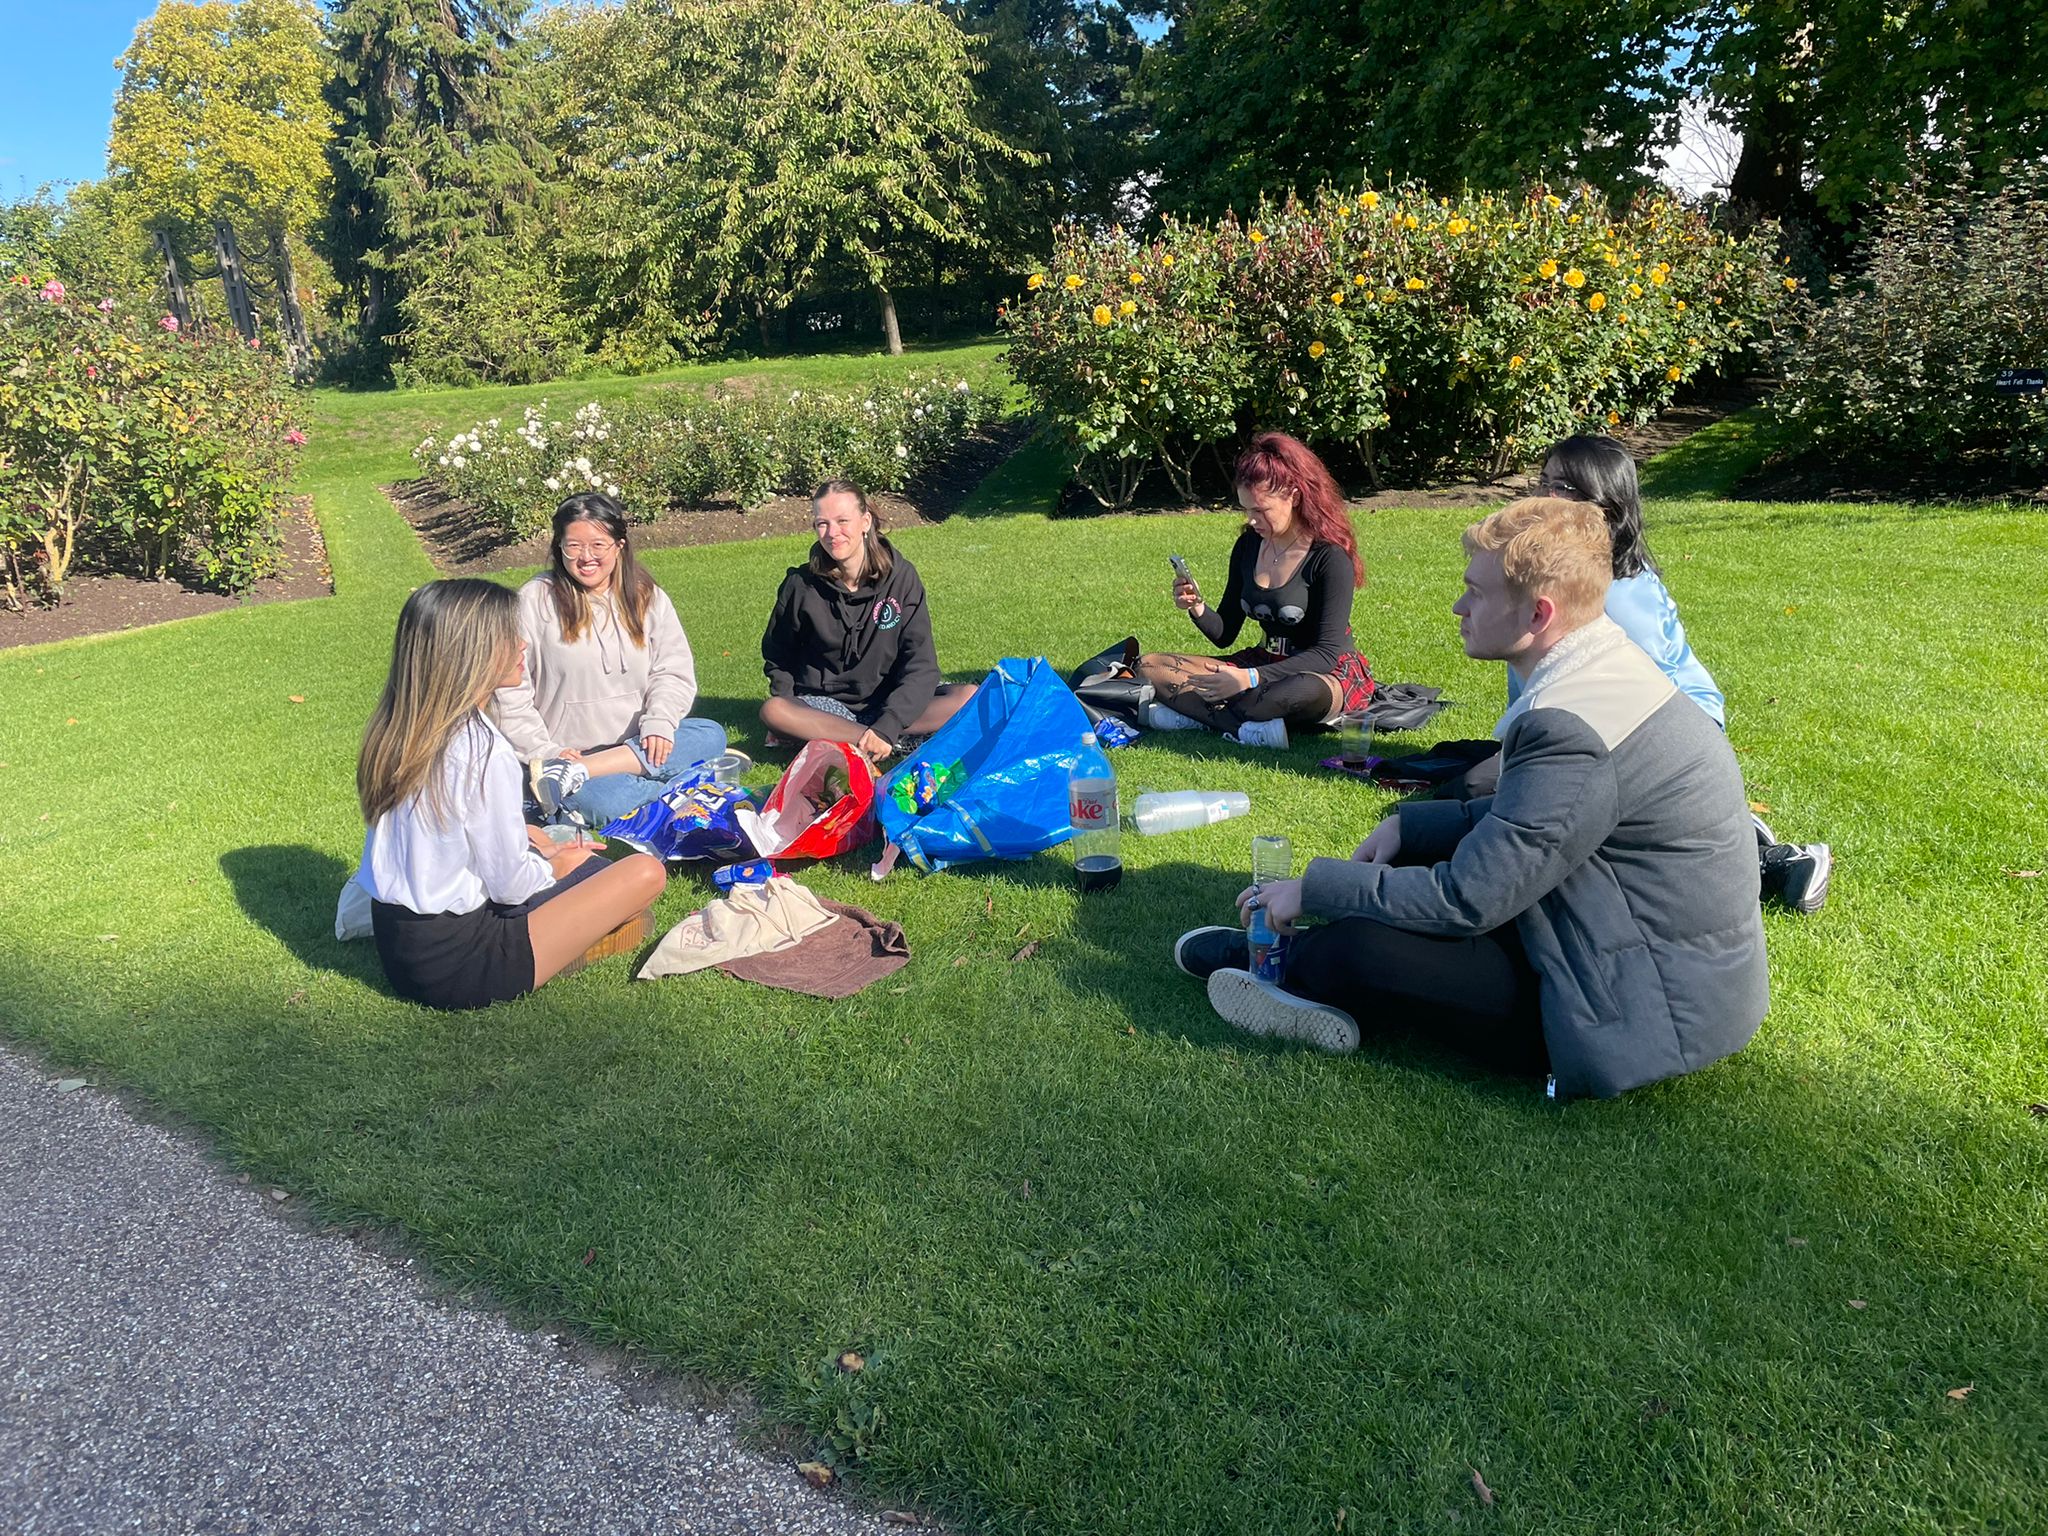 Image taken from EISPS Society's picnic depicting six university-aged individuals sitting on the grass with some drinks and snacks. It is a sunny day with blue skies at Regent's Park.